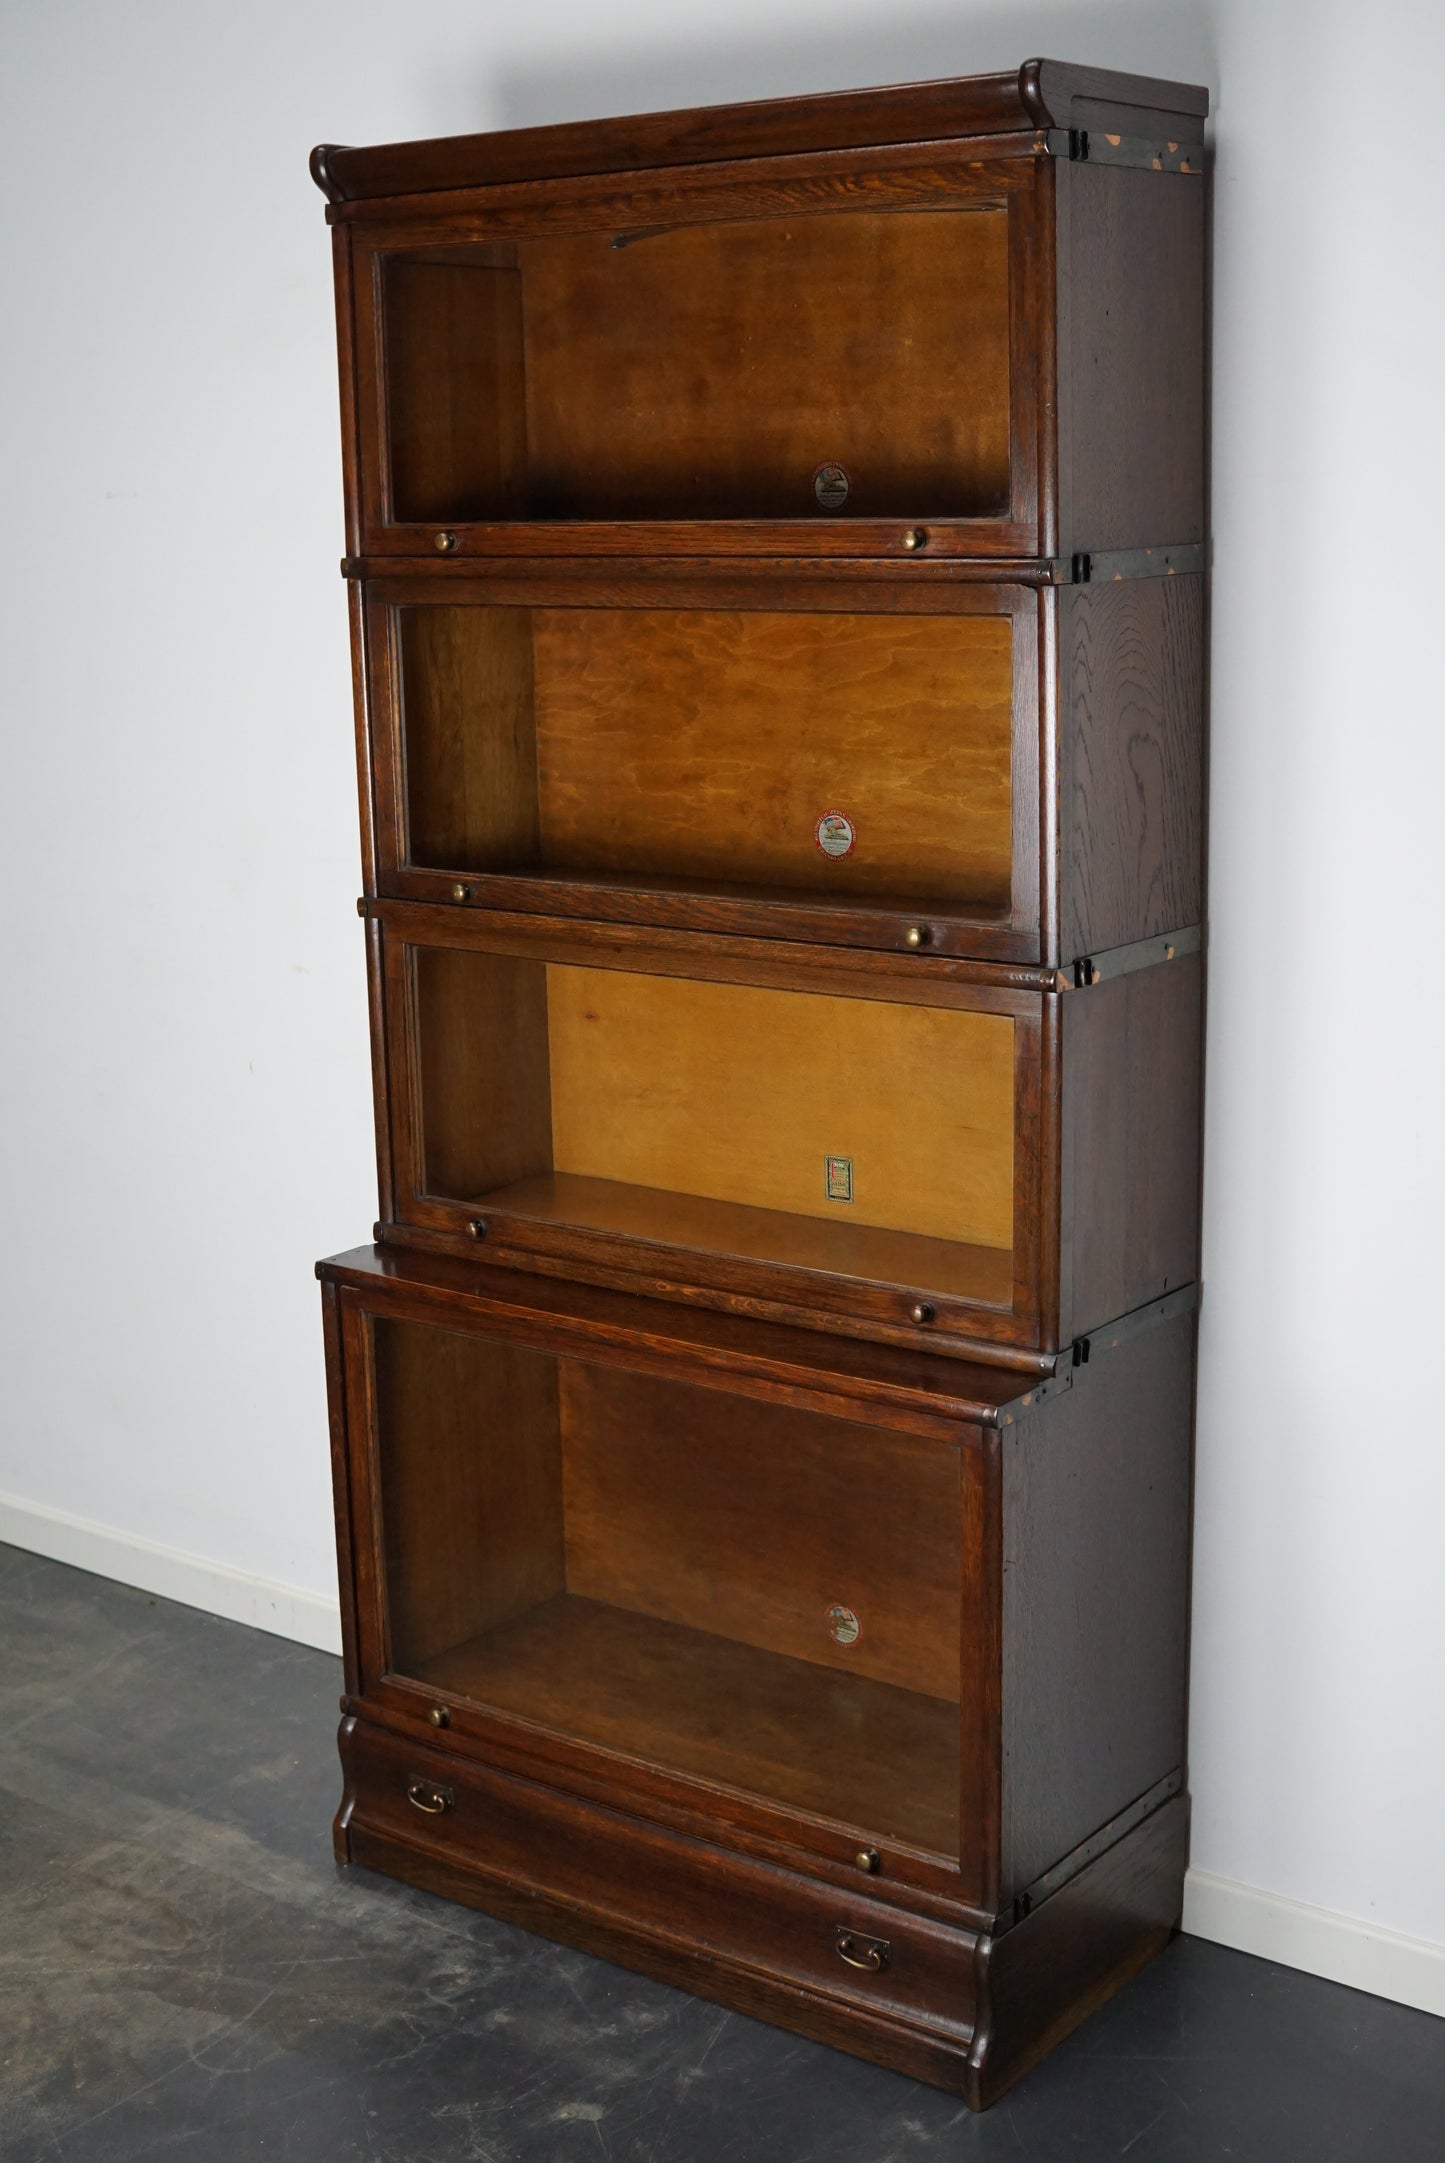 Antique Oak Stacking Bookcase by Union Zeiss / Globe Wernicke, ca 1900